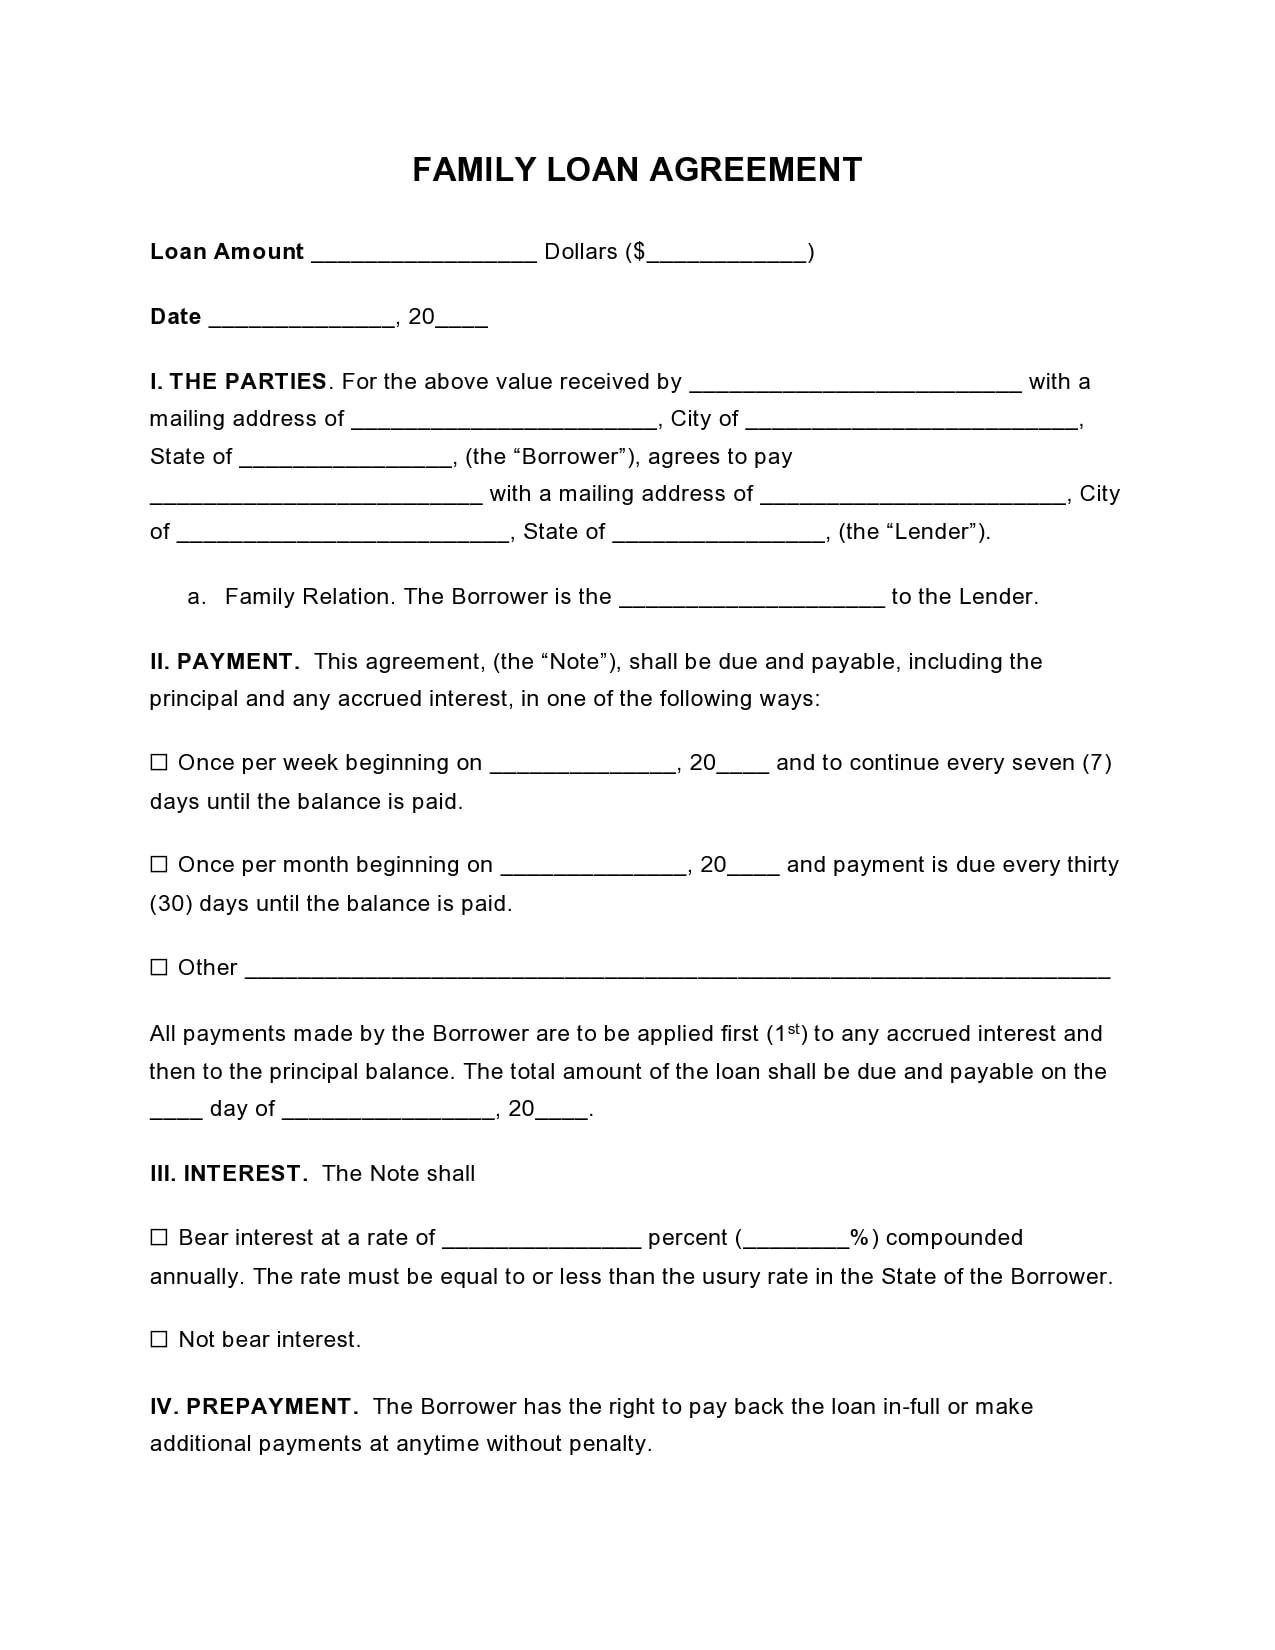 29 Simple Family Loan Agreement Templates 100 Free Home equity loan agreement template